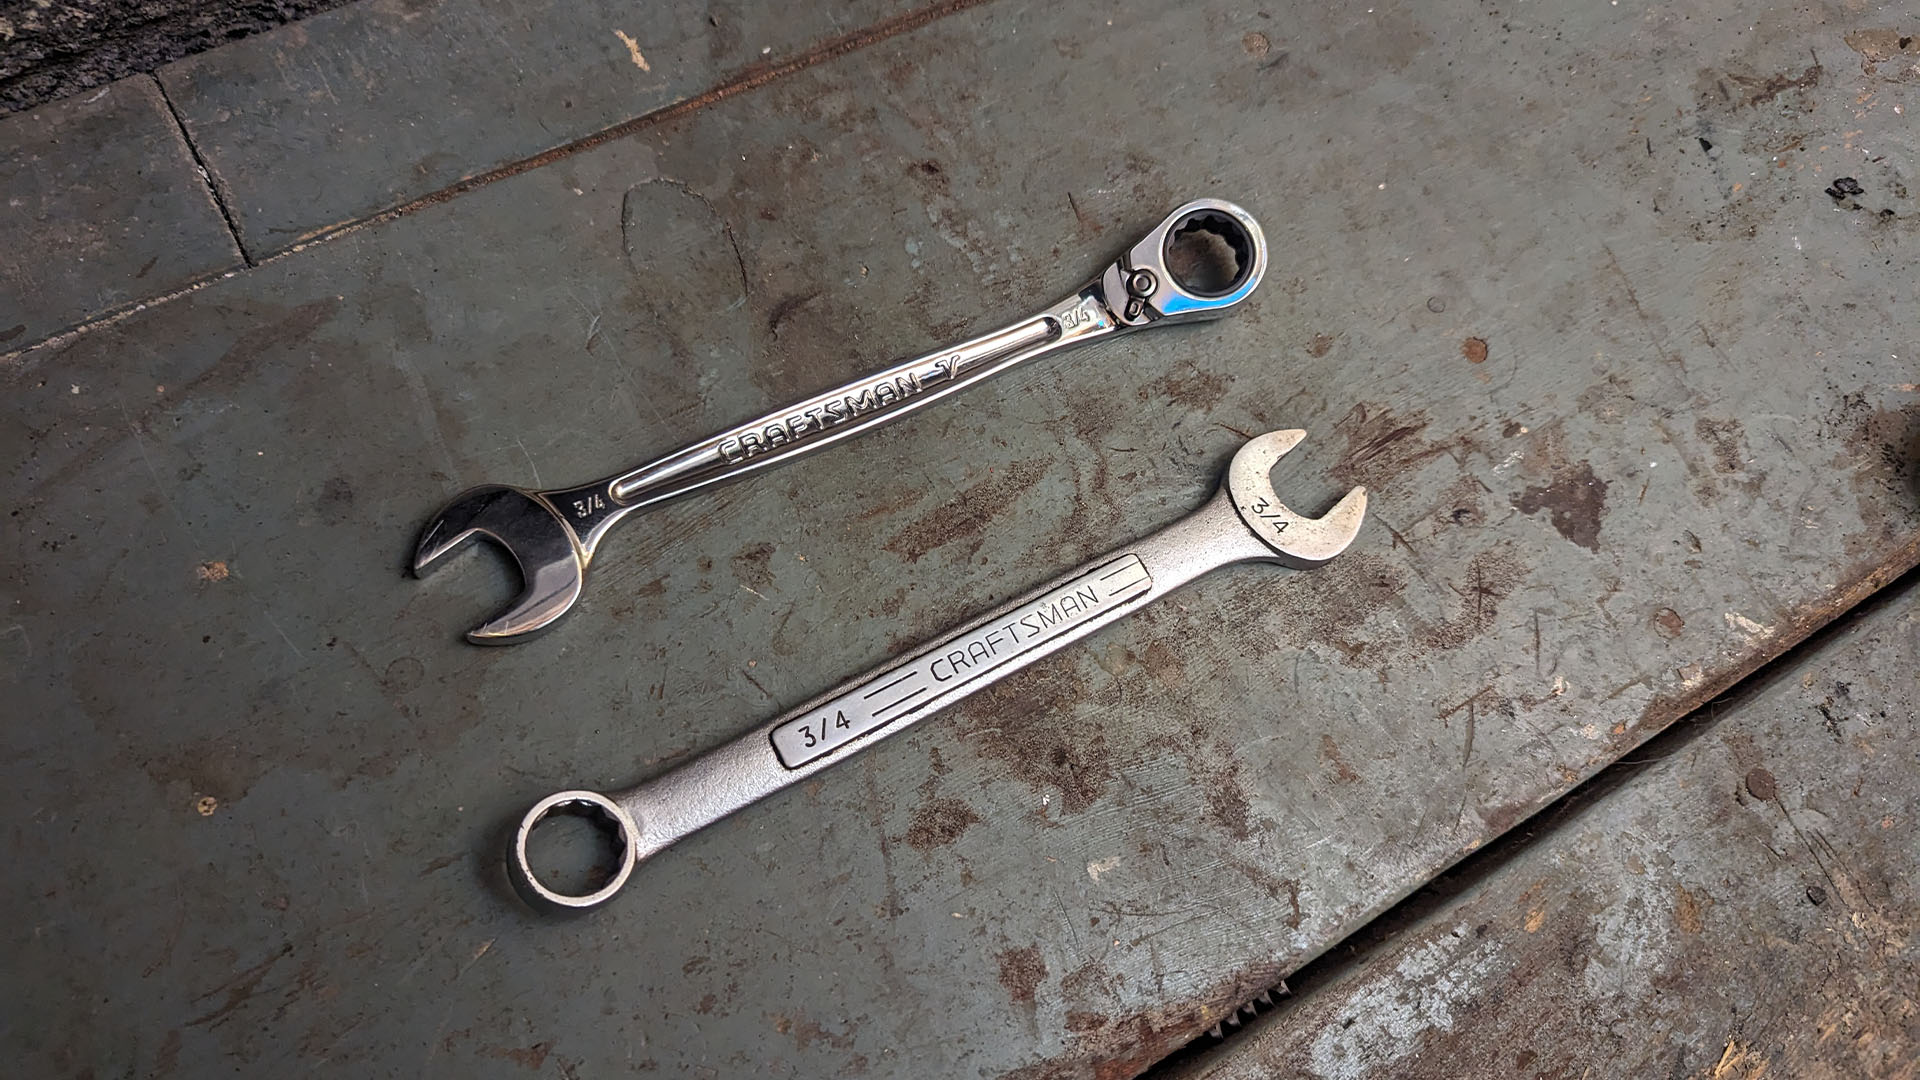 Craftsman wrenches compared